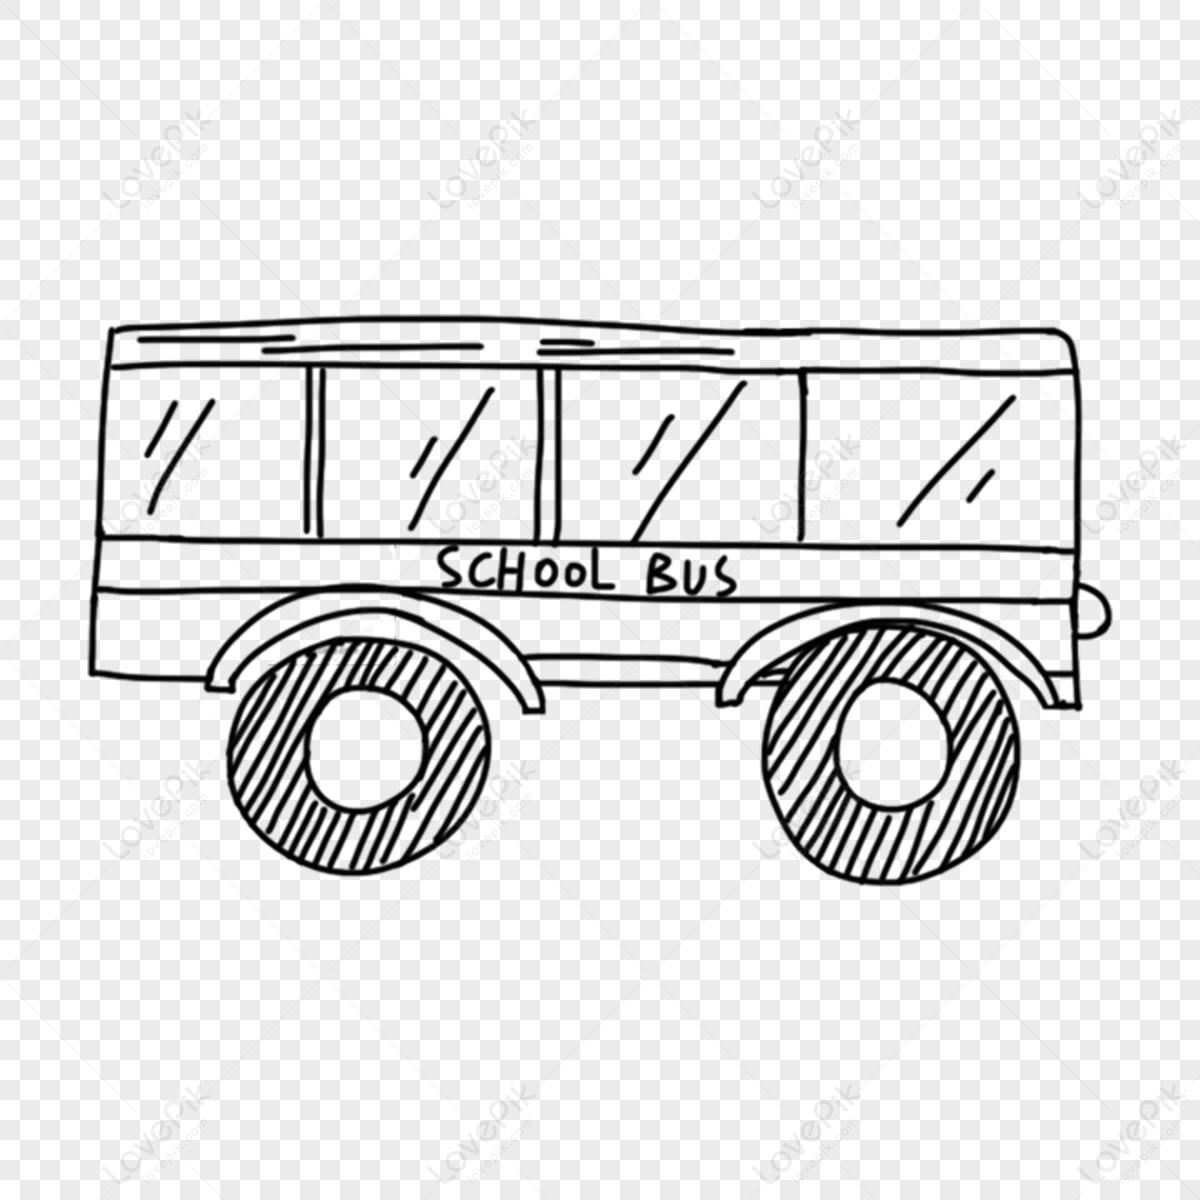 How to Draw a School Bus | Easy Pencil Drawing Tutorial - YouTube